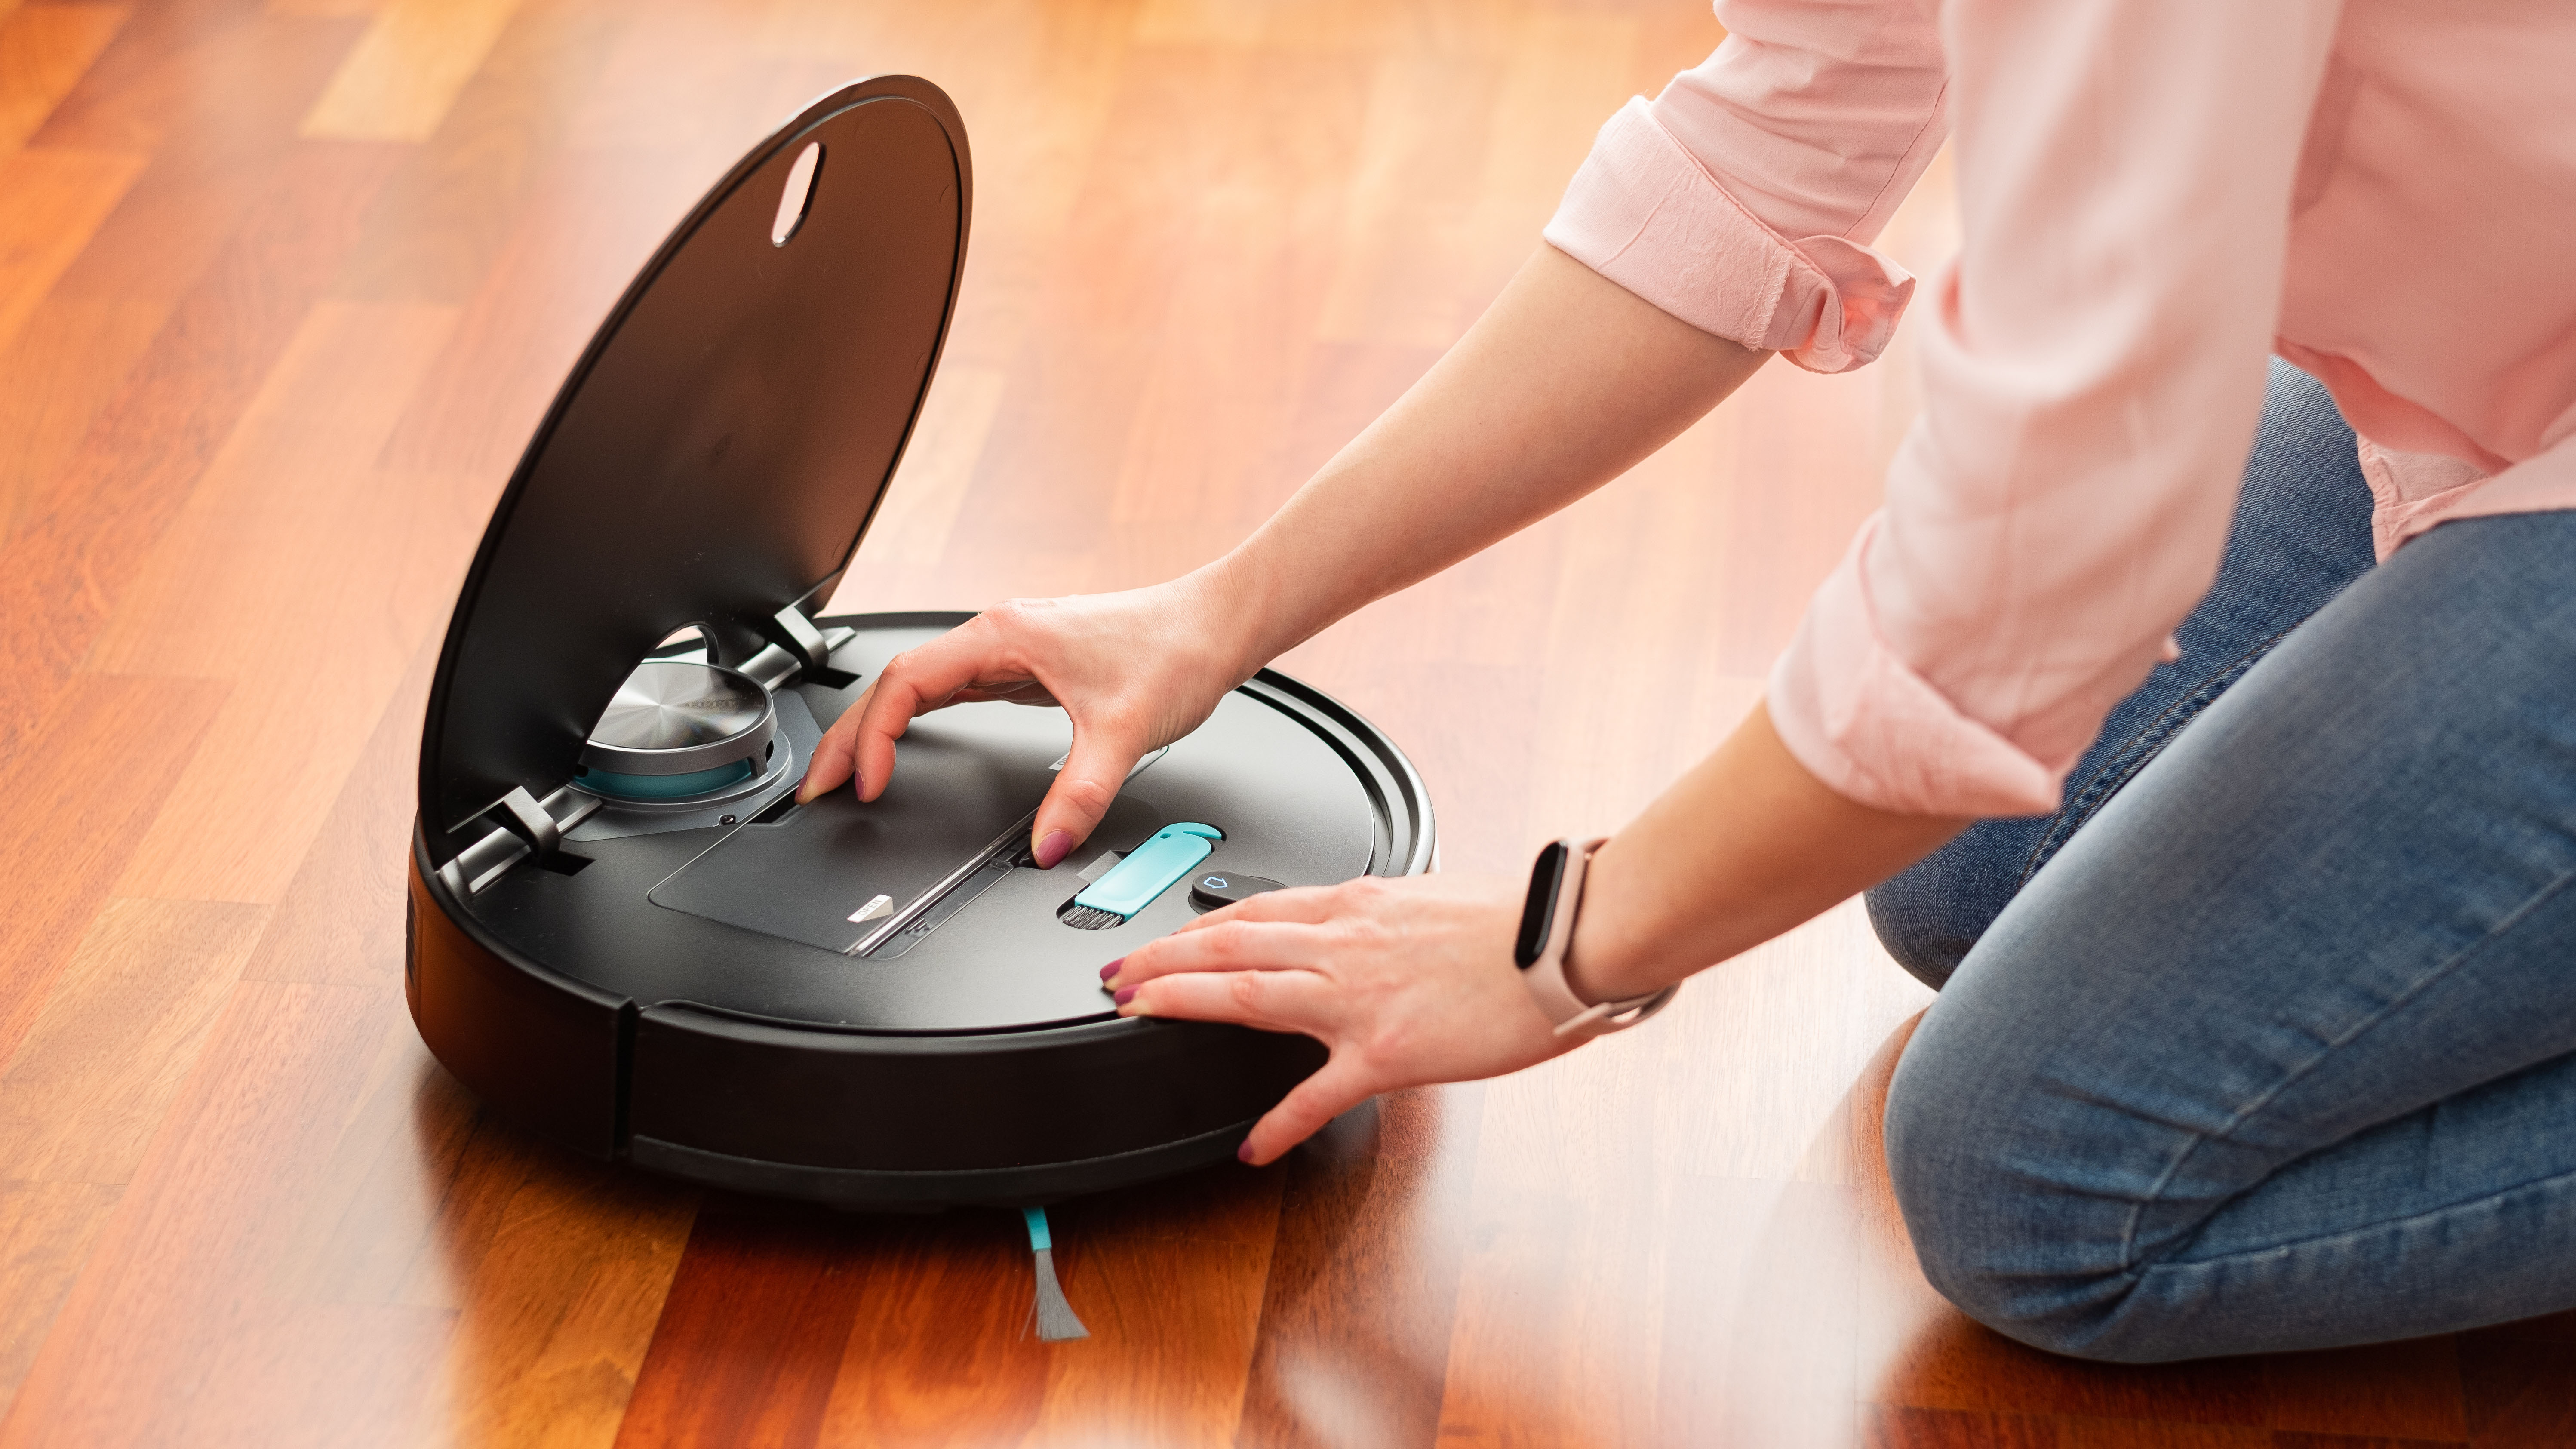 A robot vacuum's dustbin being emptied